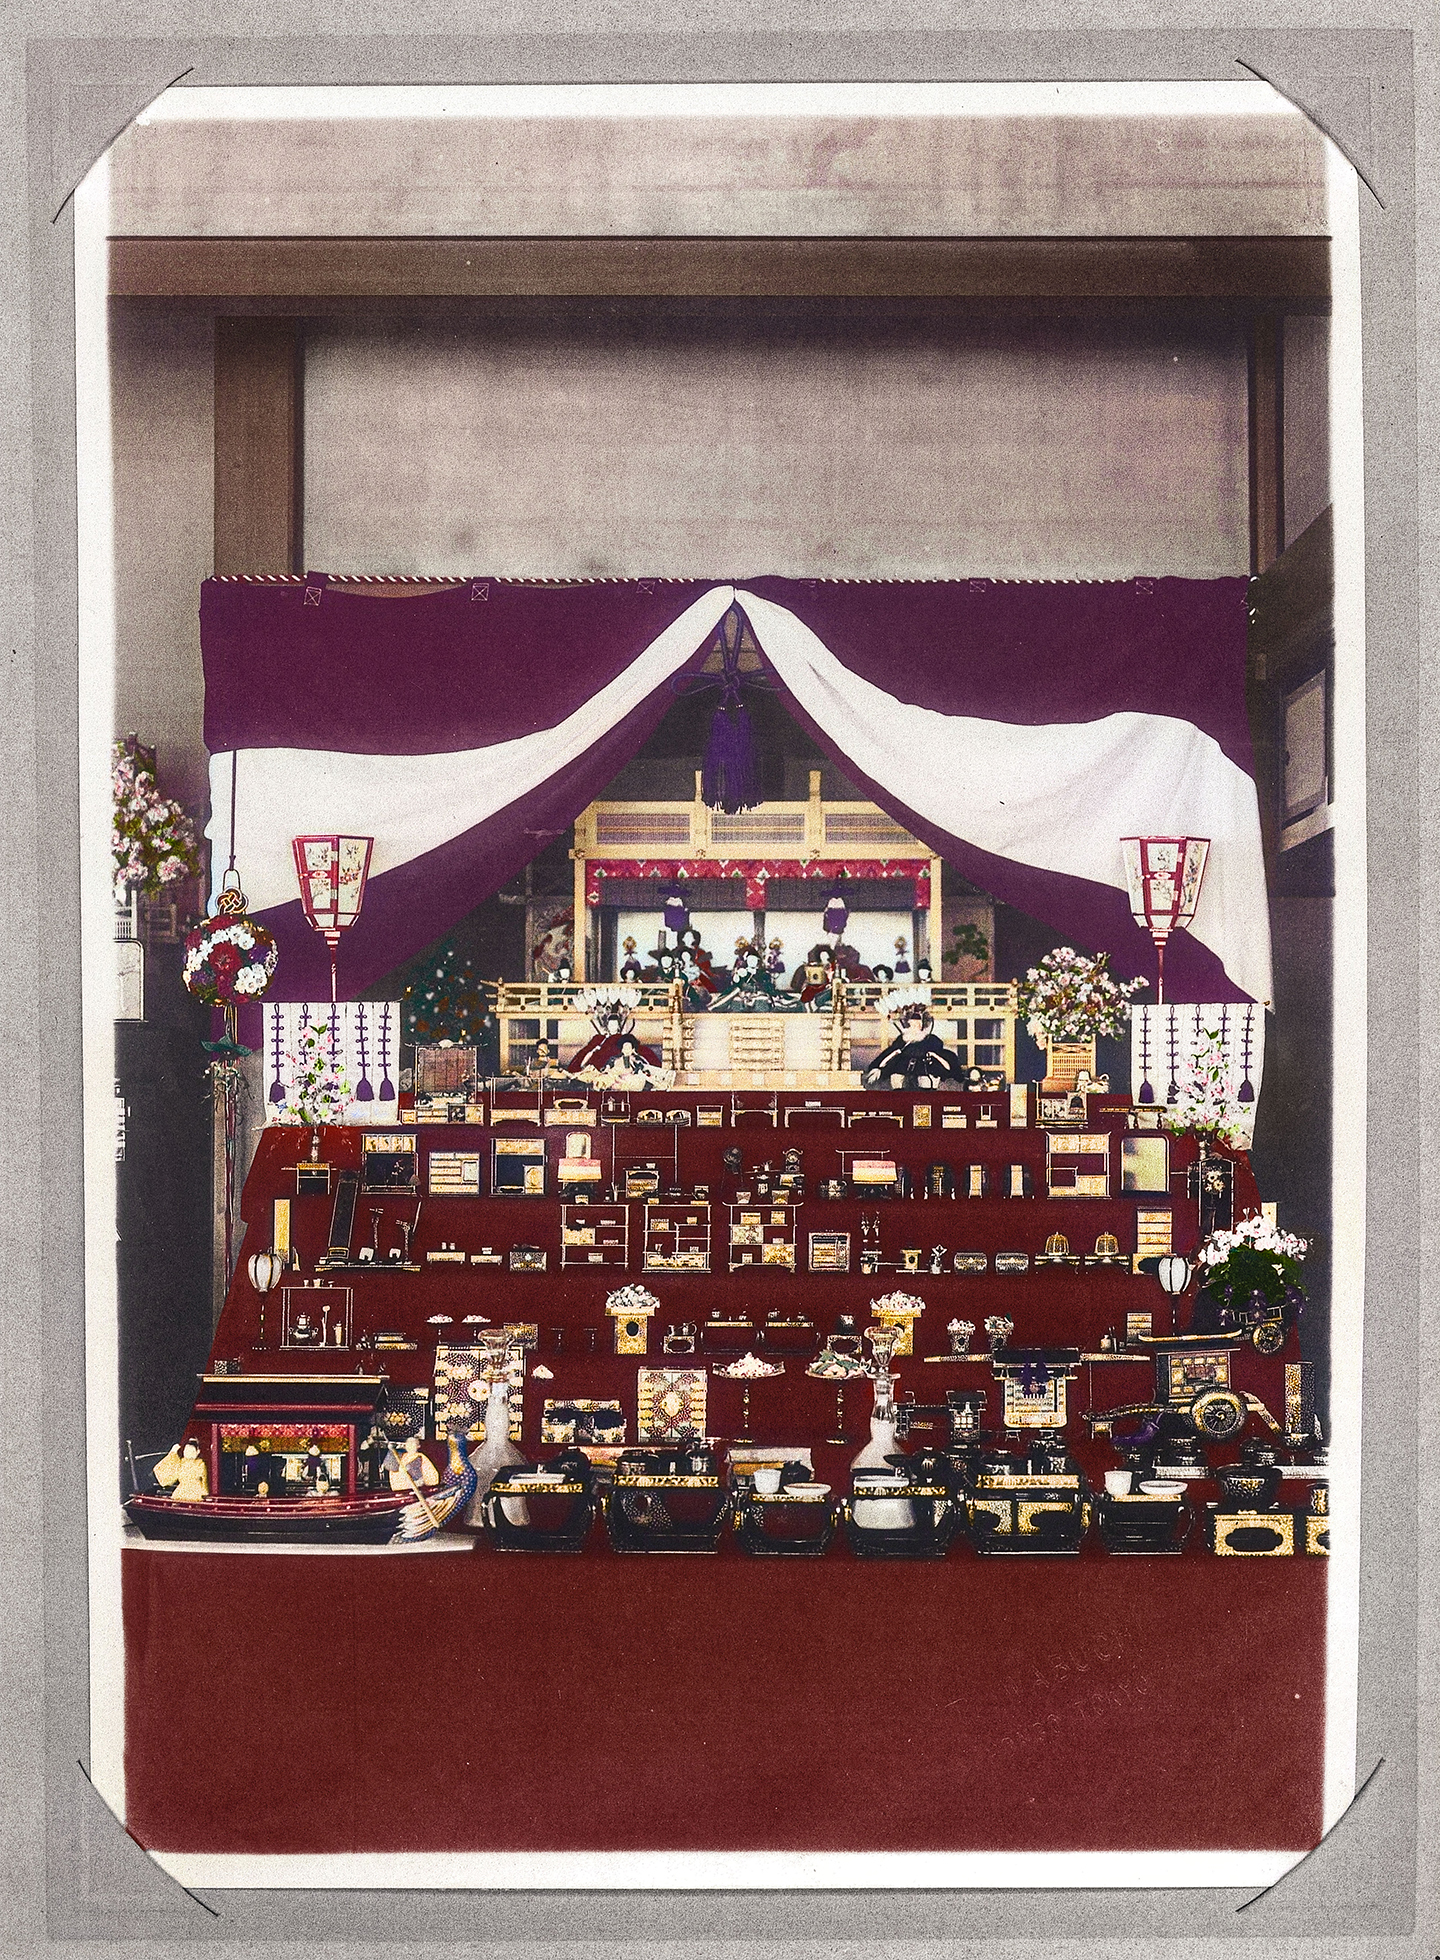 【Edo Tokyo Rethink】The Colors of the Meiji Period’s Hina Dolls, Springing to Life in the Reiwa Period